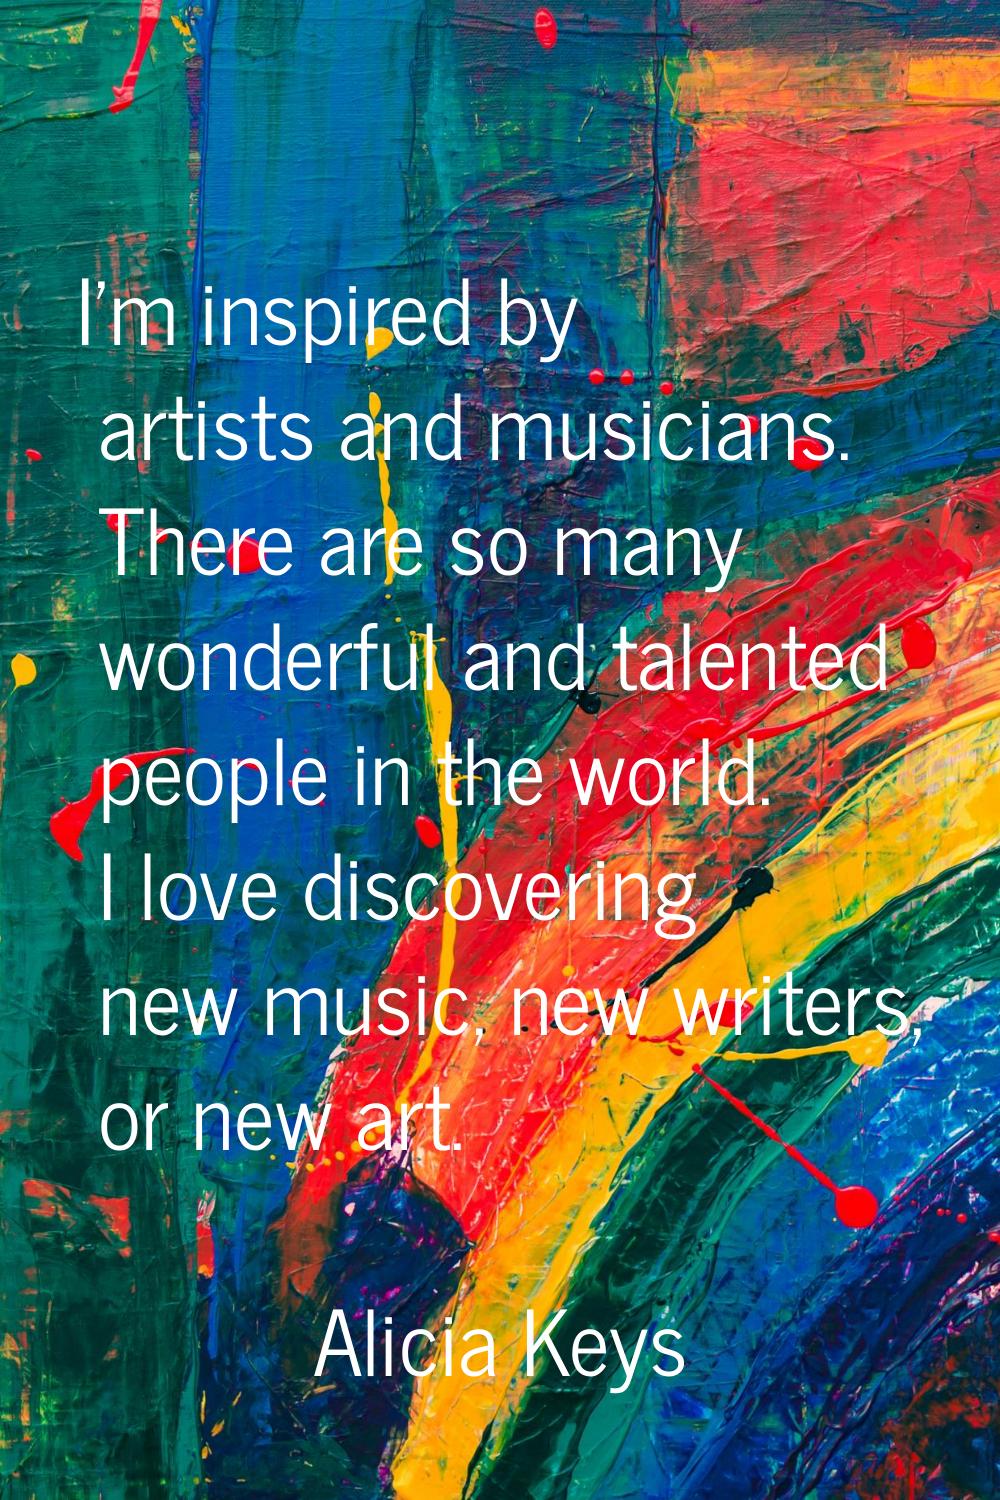 I'm inspired by artists and musicians. There are so many wonderful and talented people in the world